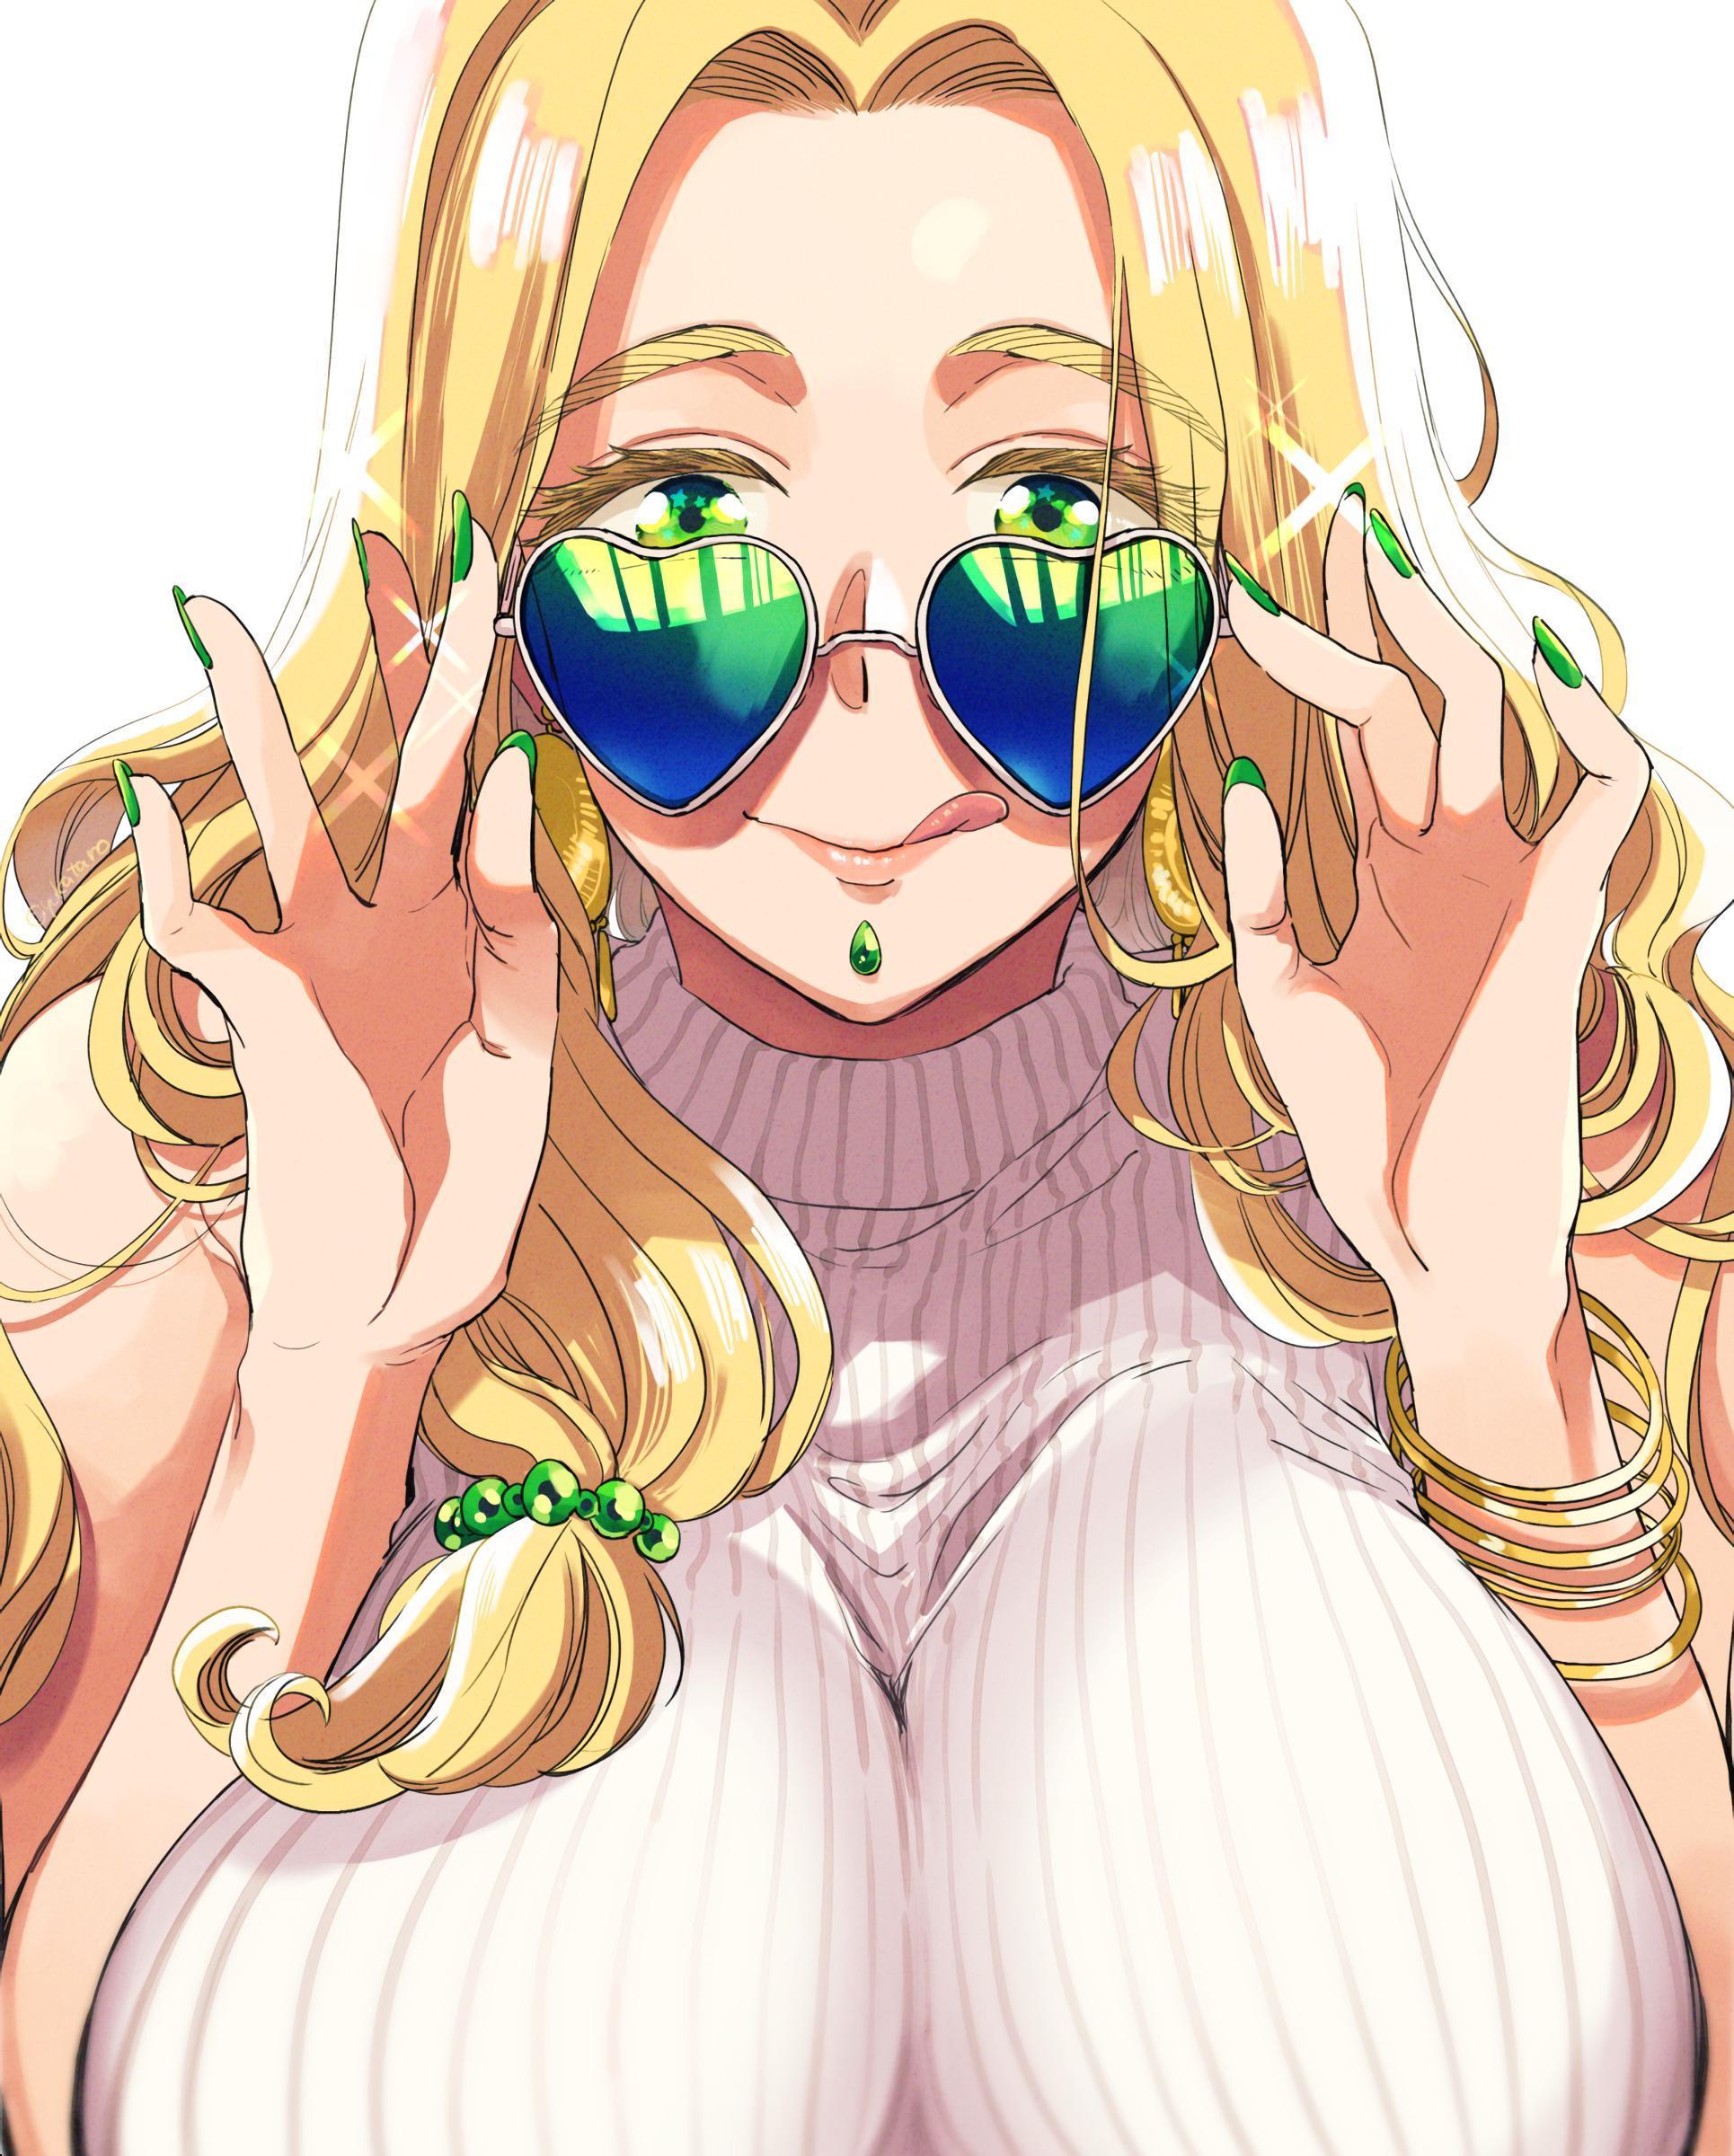 HD wallpaper, Pixiv, Fate Series, Arms Up, Bare Shoulders, Big Boobs, Anime, Casual, Shiny Hair, Women With Shades, Nail Polish, Long Hair, Jewelry, Green Eyes, Saggy Tits, Messy Hair, Fate Grand Order, Smiling, Bracelets, Fgo, Anime Girls, Alternate Costume, Tongue Out, Blond Hair, Quetzalcoatl Fgo, Sleeveless, 2D, Turtlenecks, Simple Background, White Sweater, Pressed Boobs, Looking At Viewer, Yukataro, Green Nails, Fan Art, Touching Glasses, Women Outdoors, Wide Breasts, Pink Lipstick, Pigtails